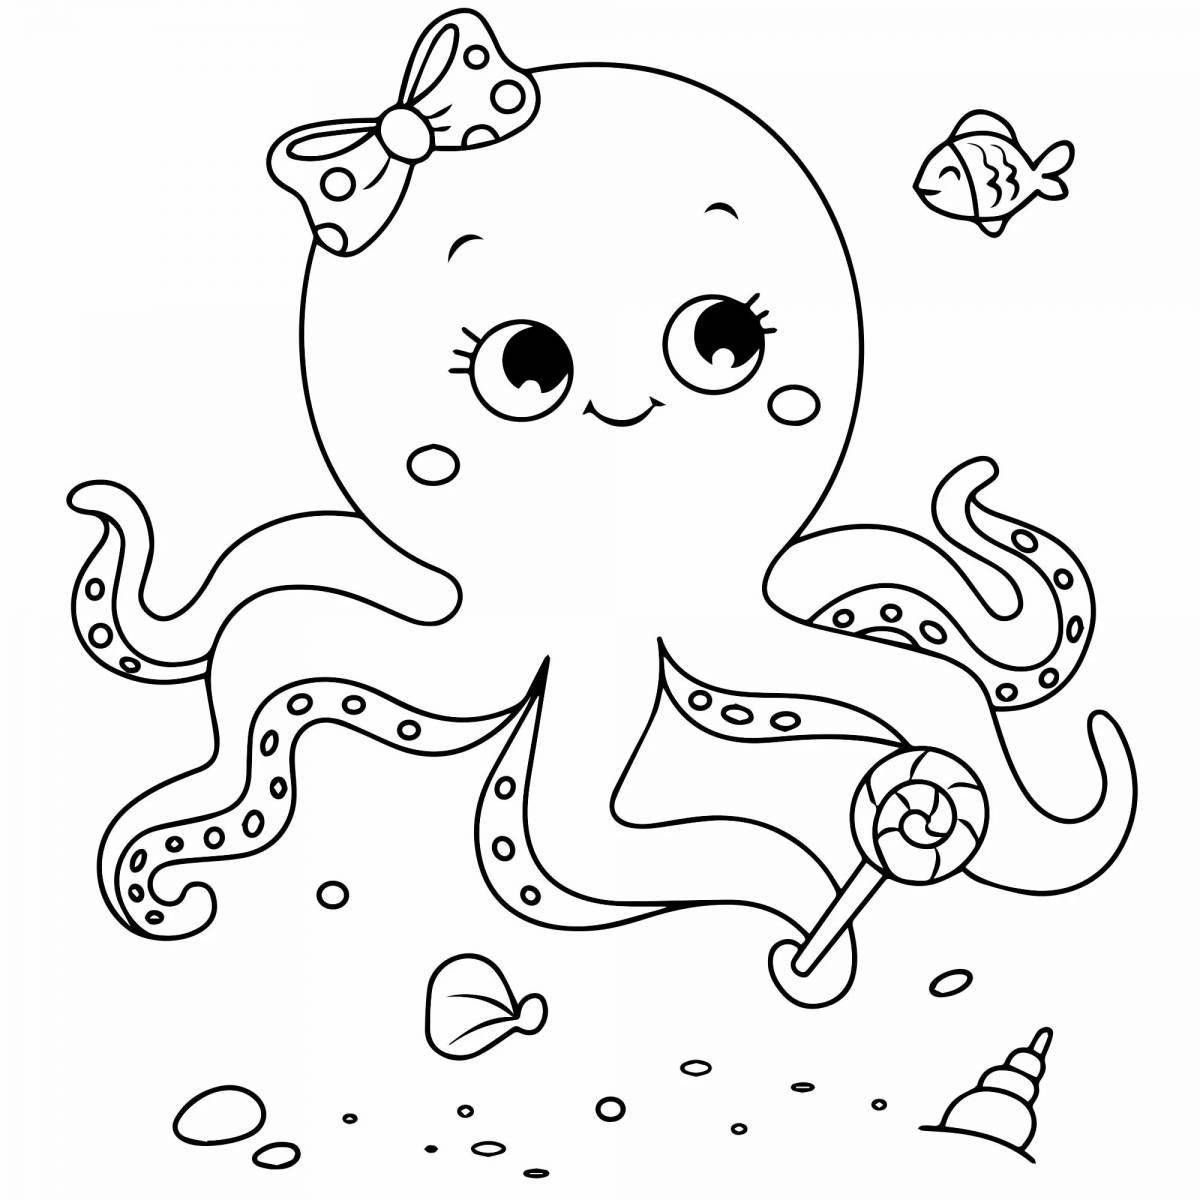 Fun coloring book of marine animals for kids